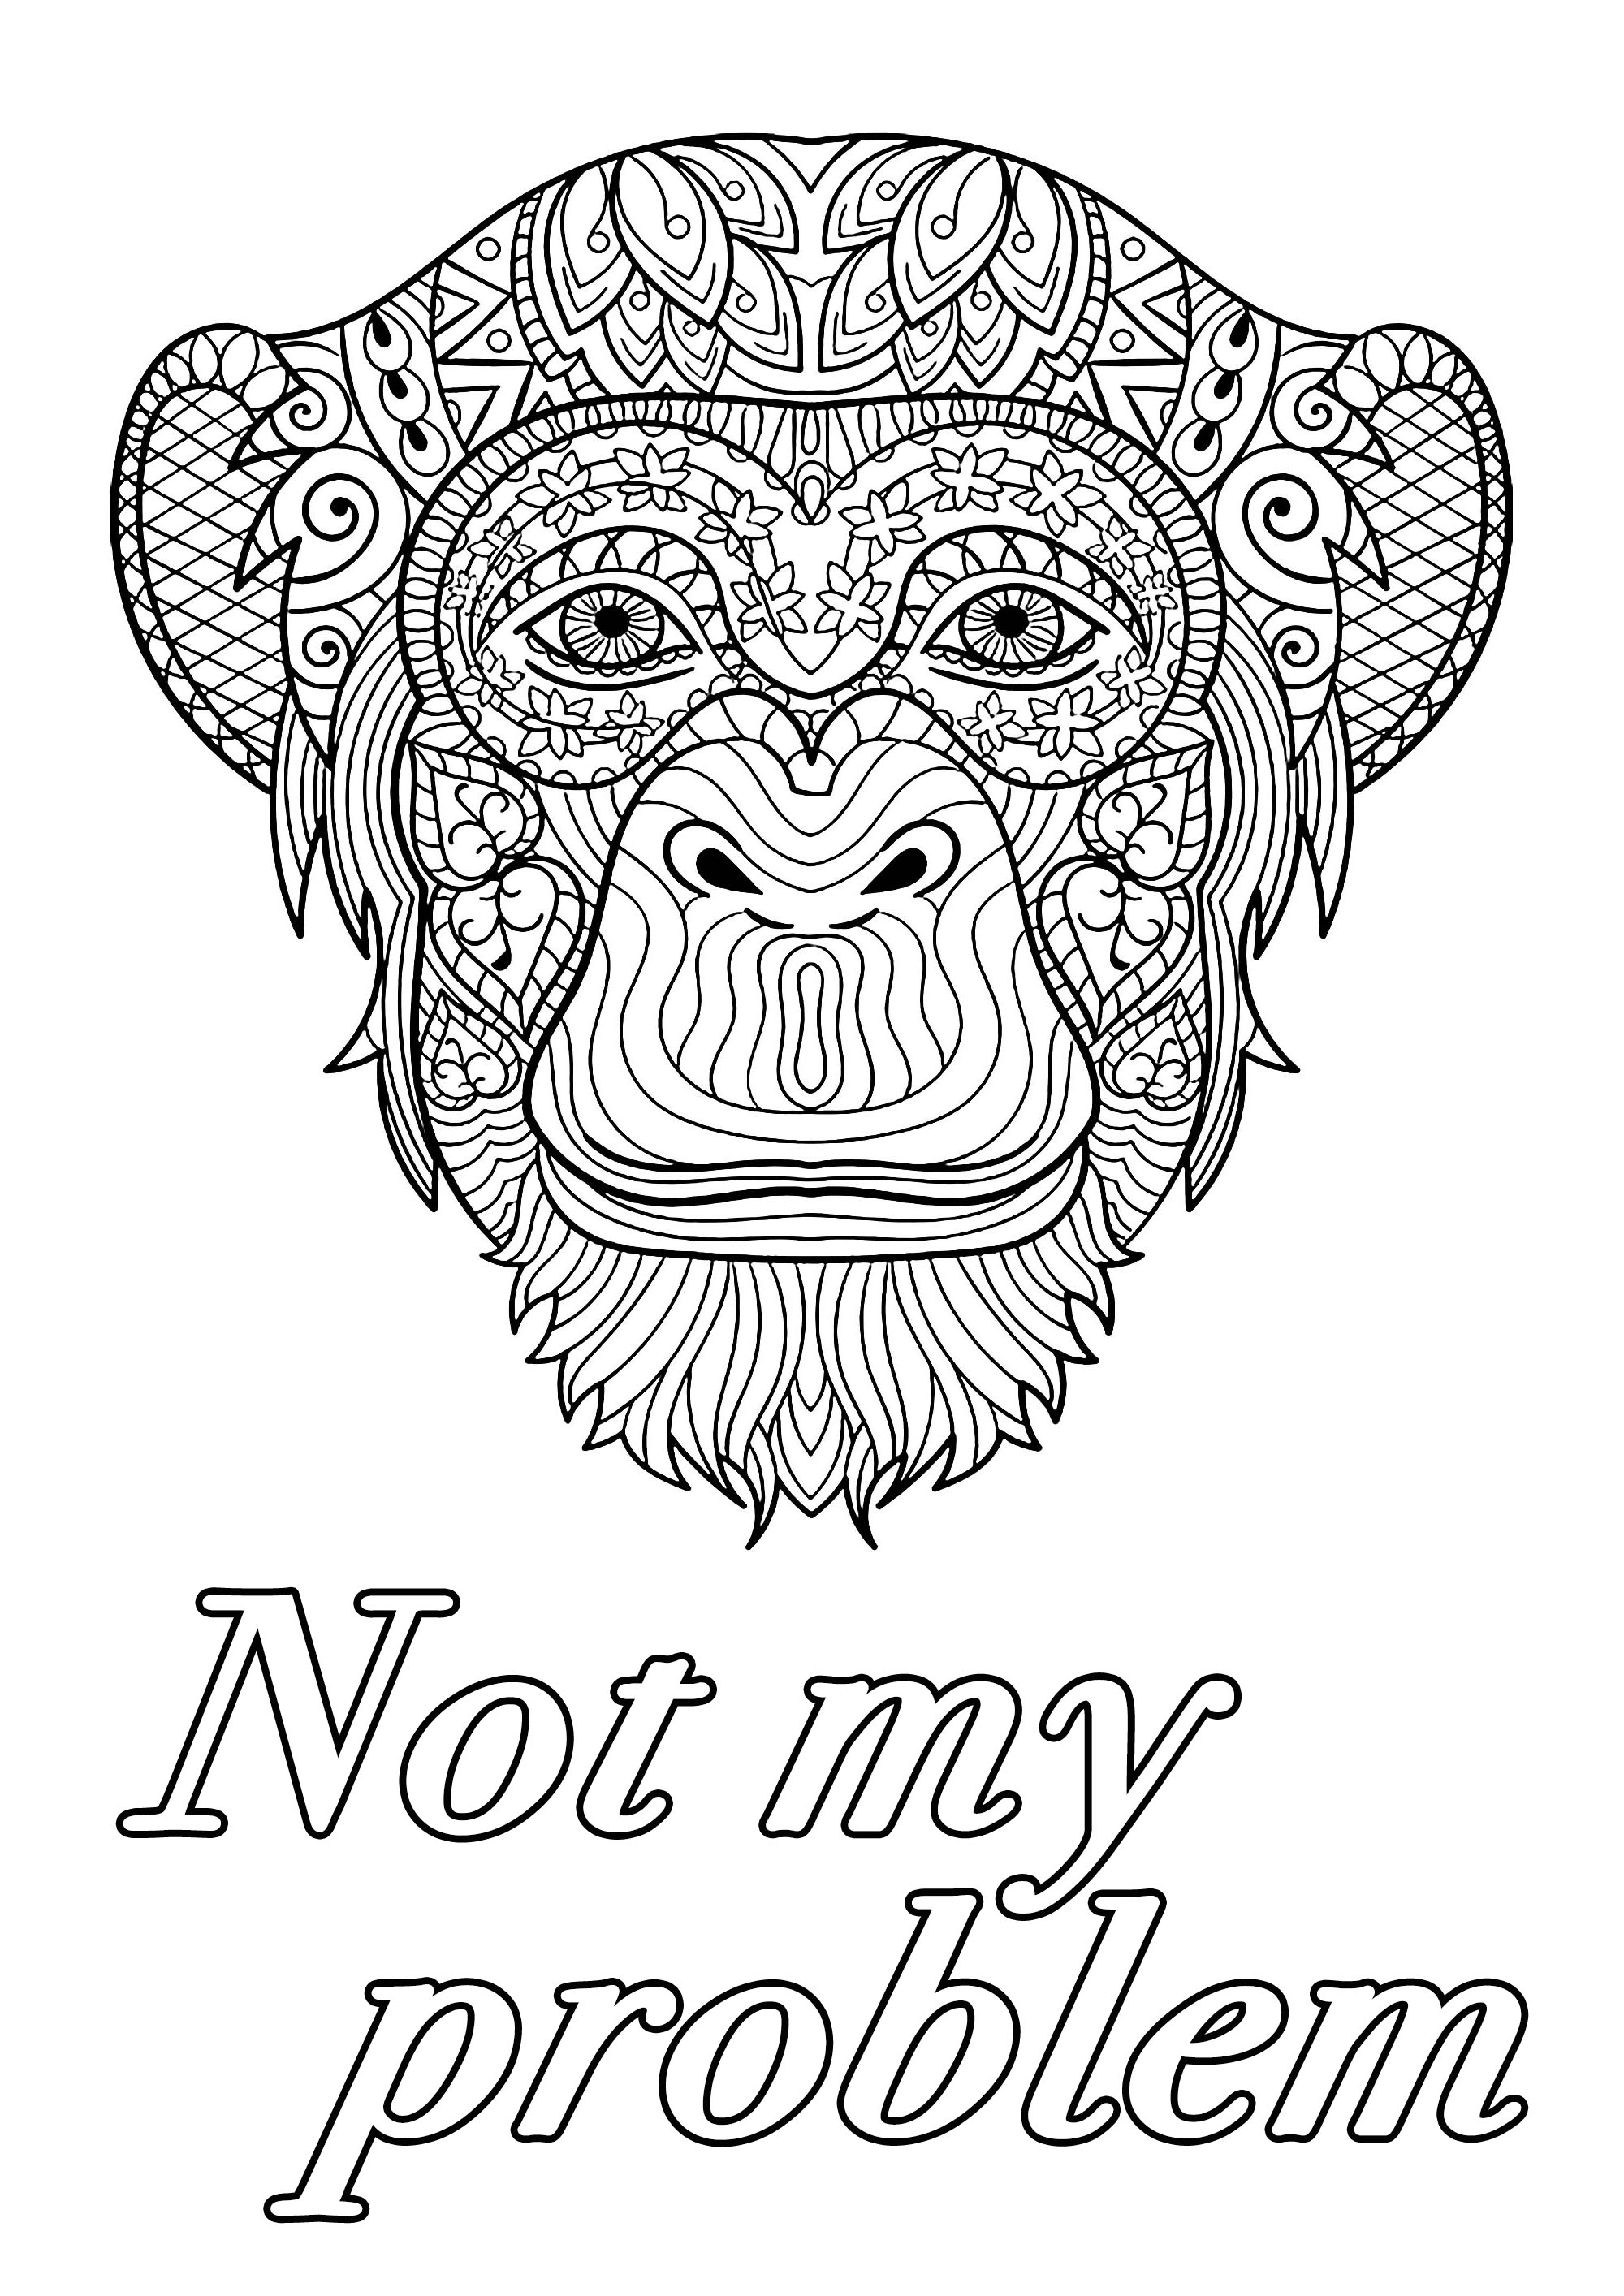 Not my problem : Swear word coloring page with big monkey head